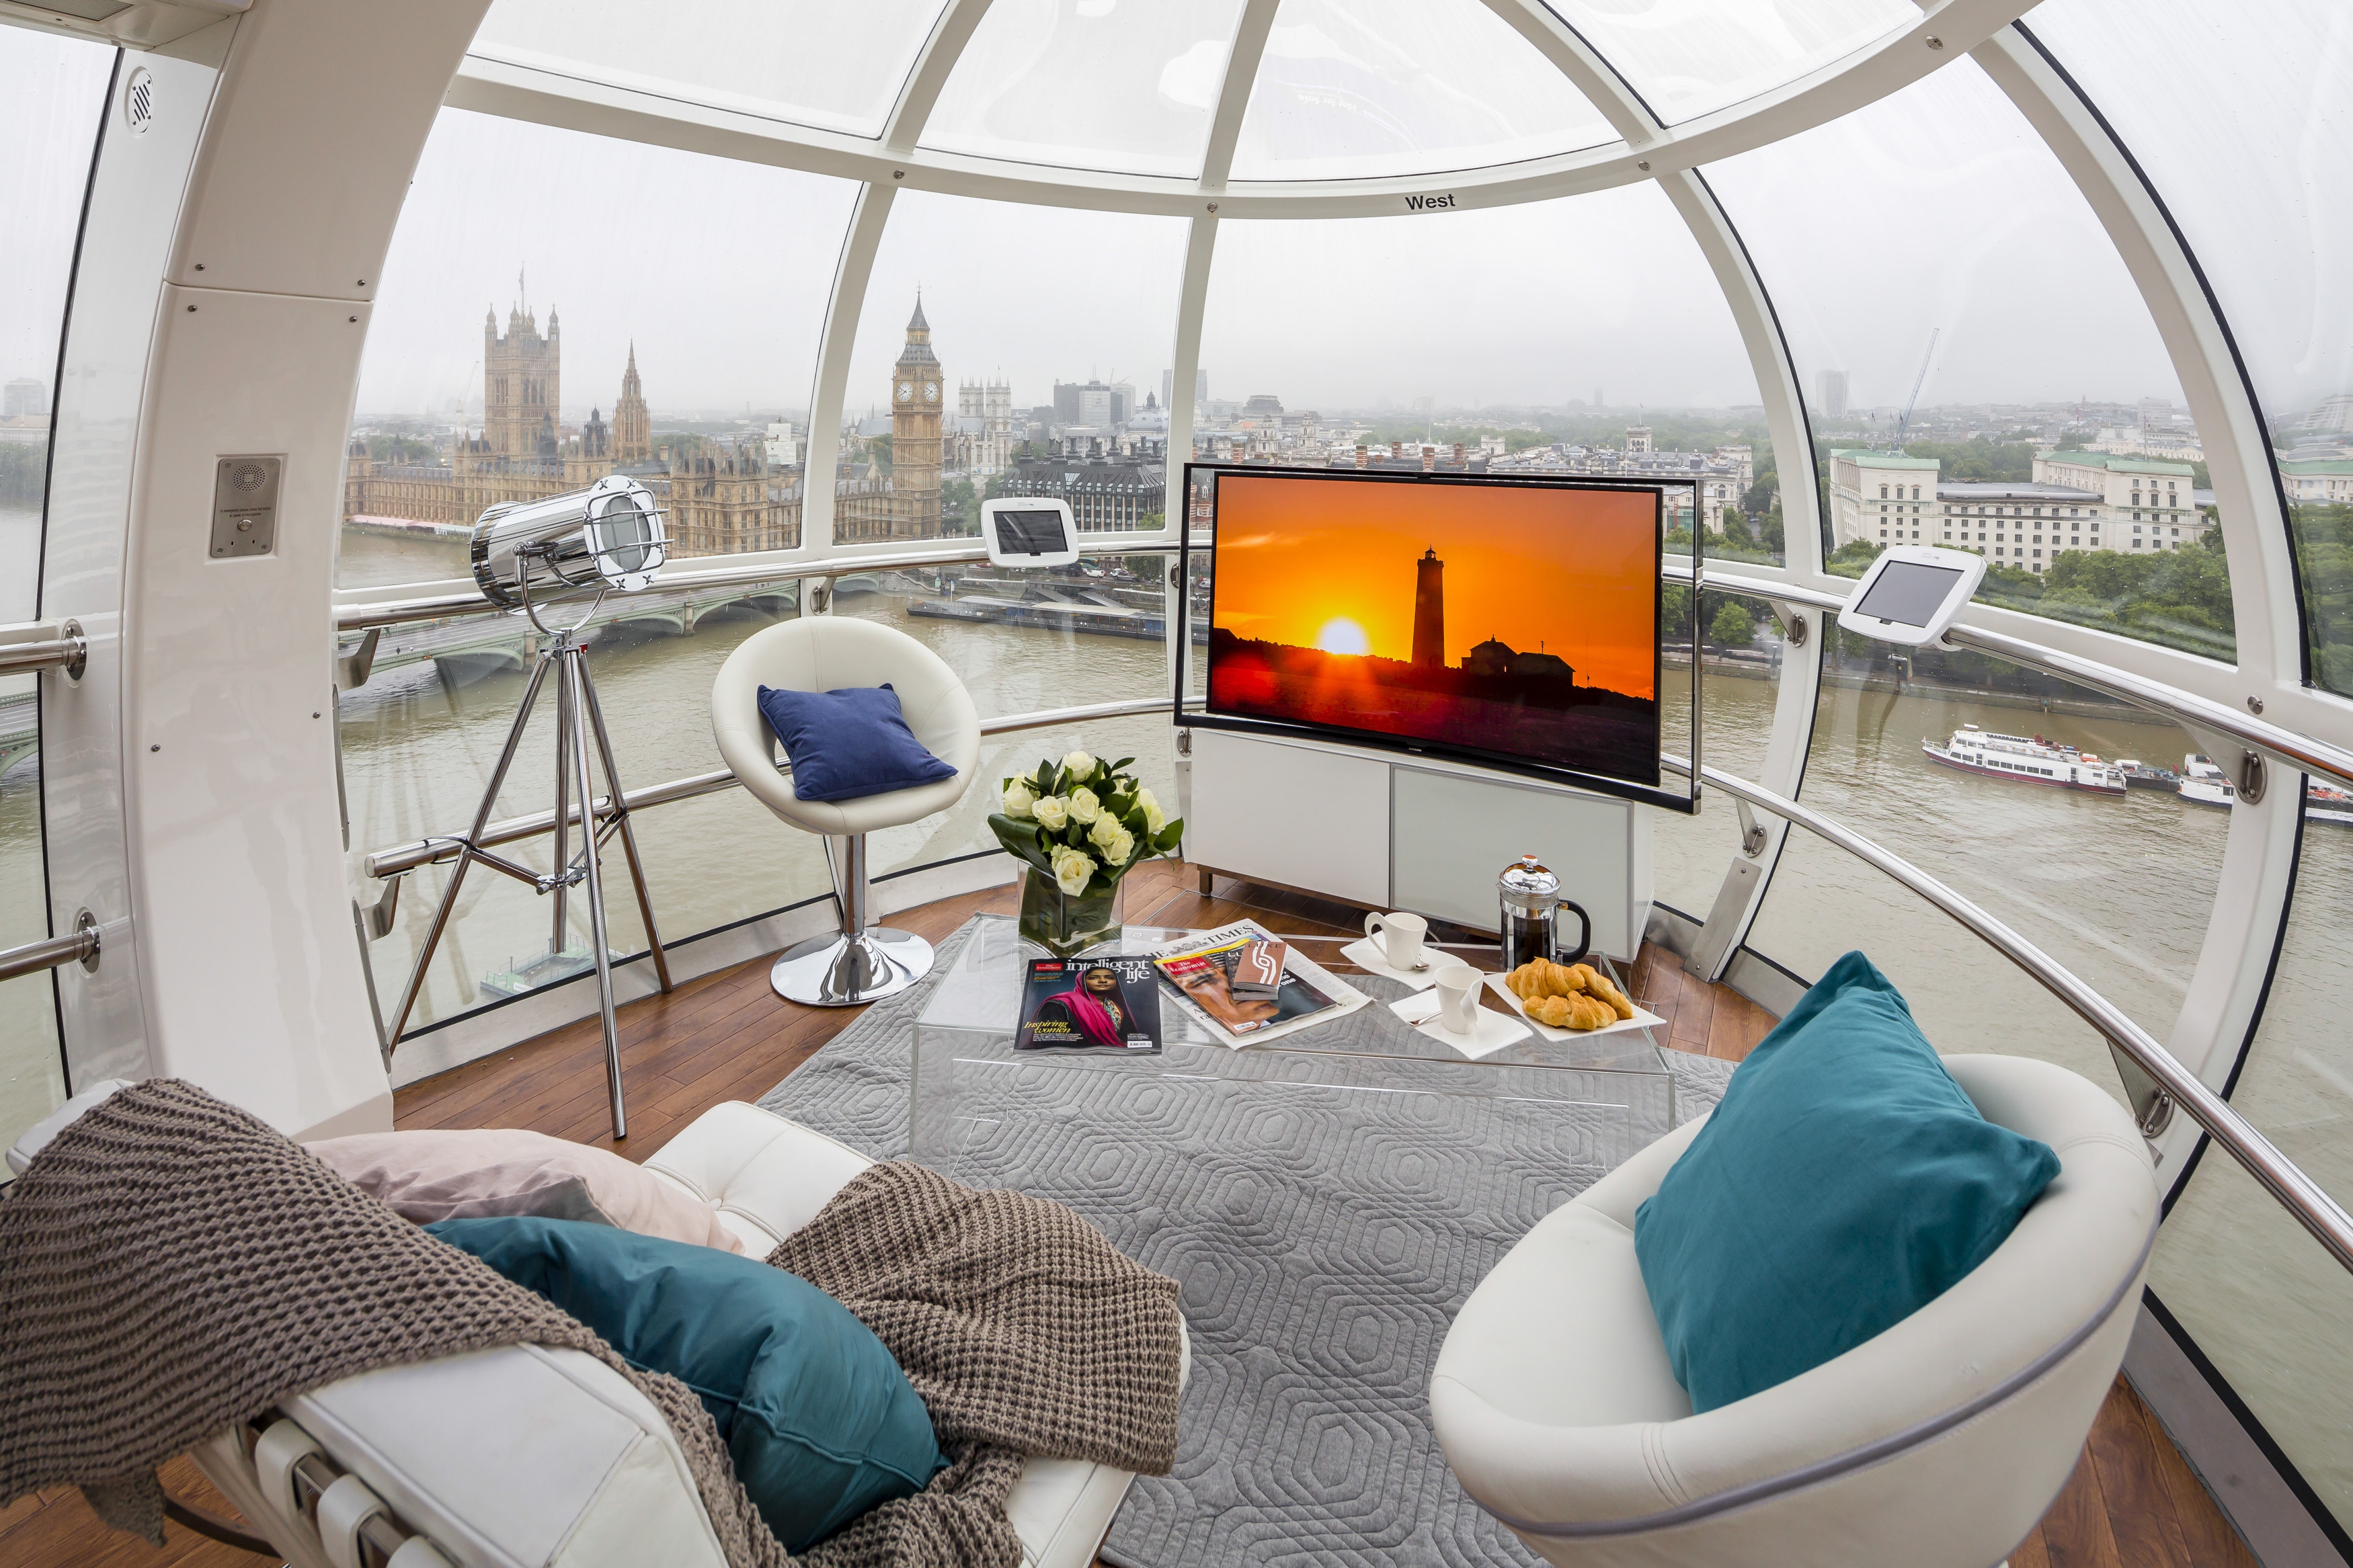 Samsung showcases curved OLED TV on the London Eye - Tech ...